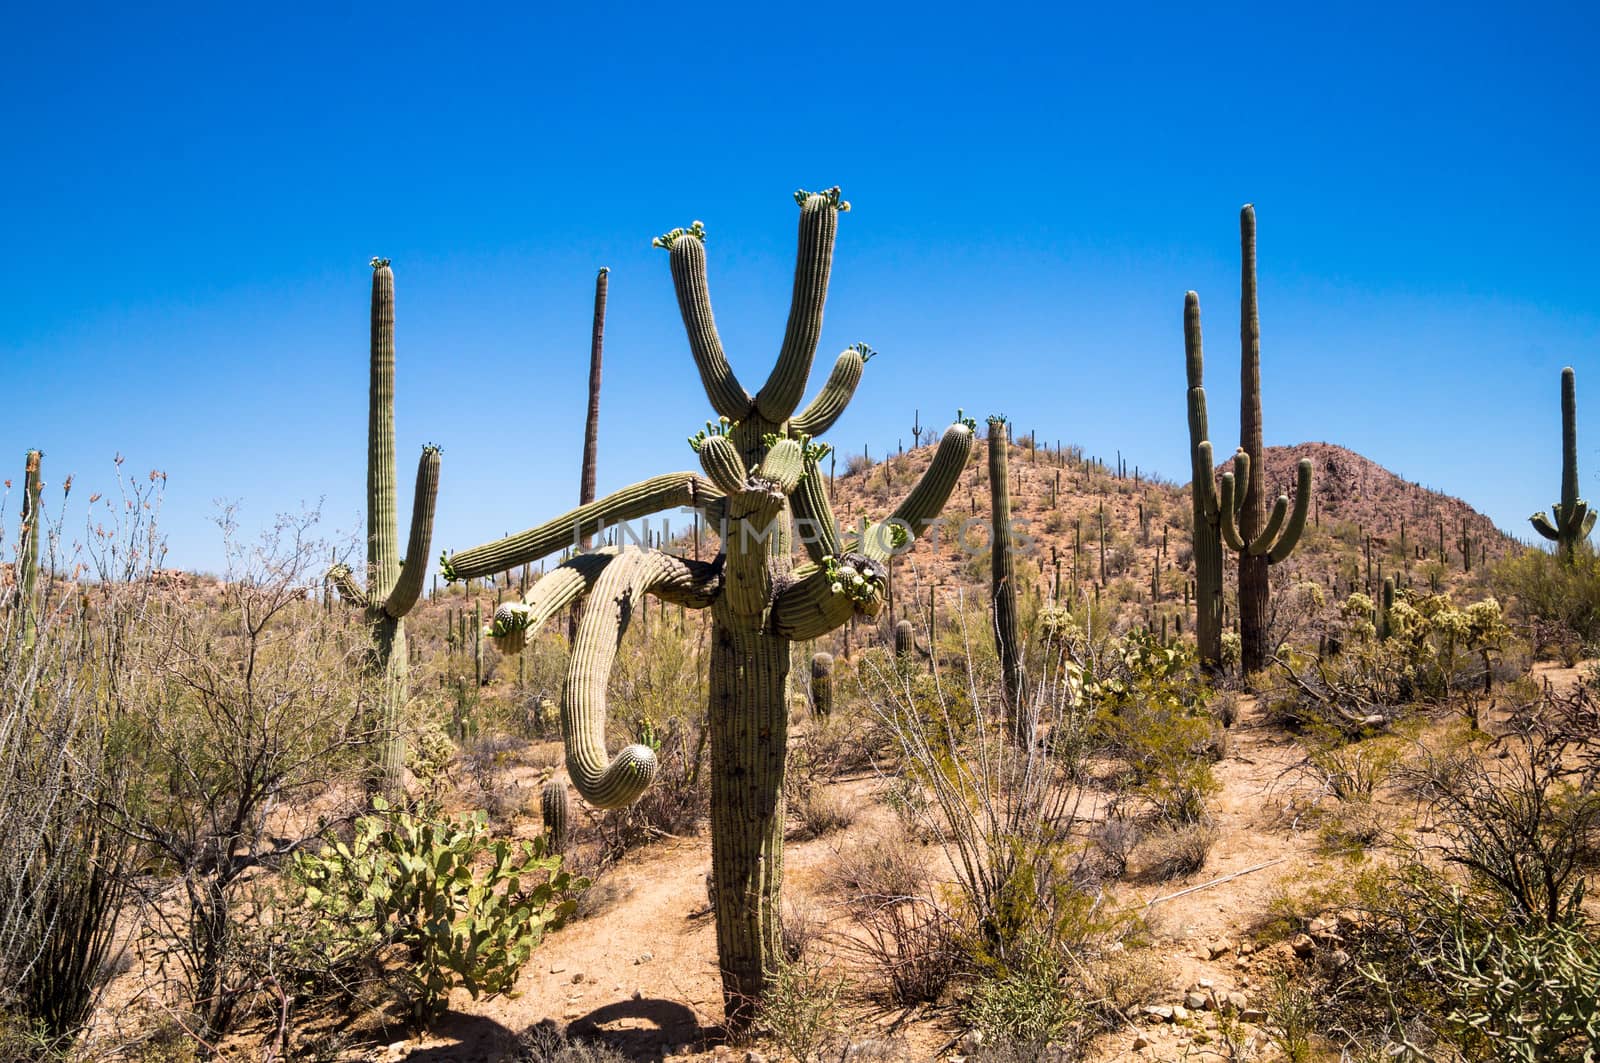 Twisted saguaro with many arms